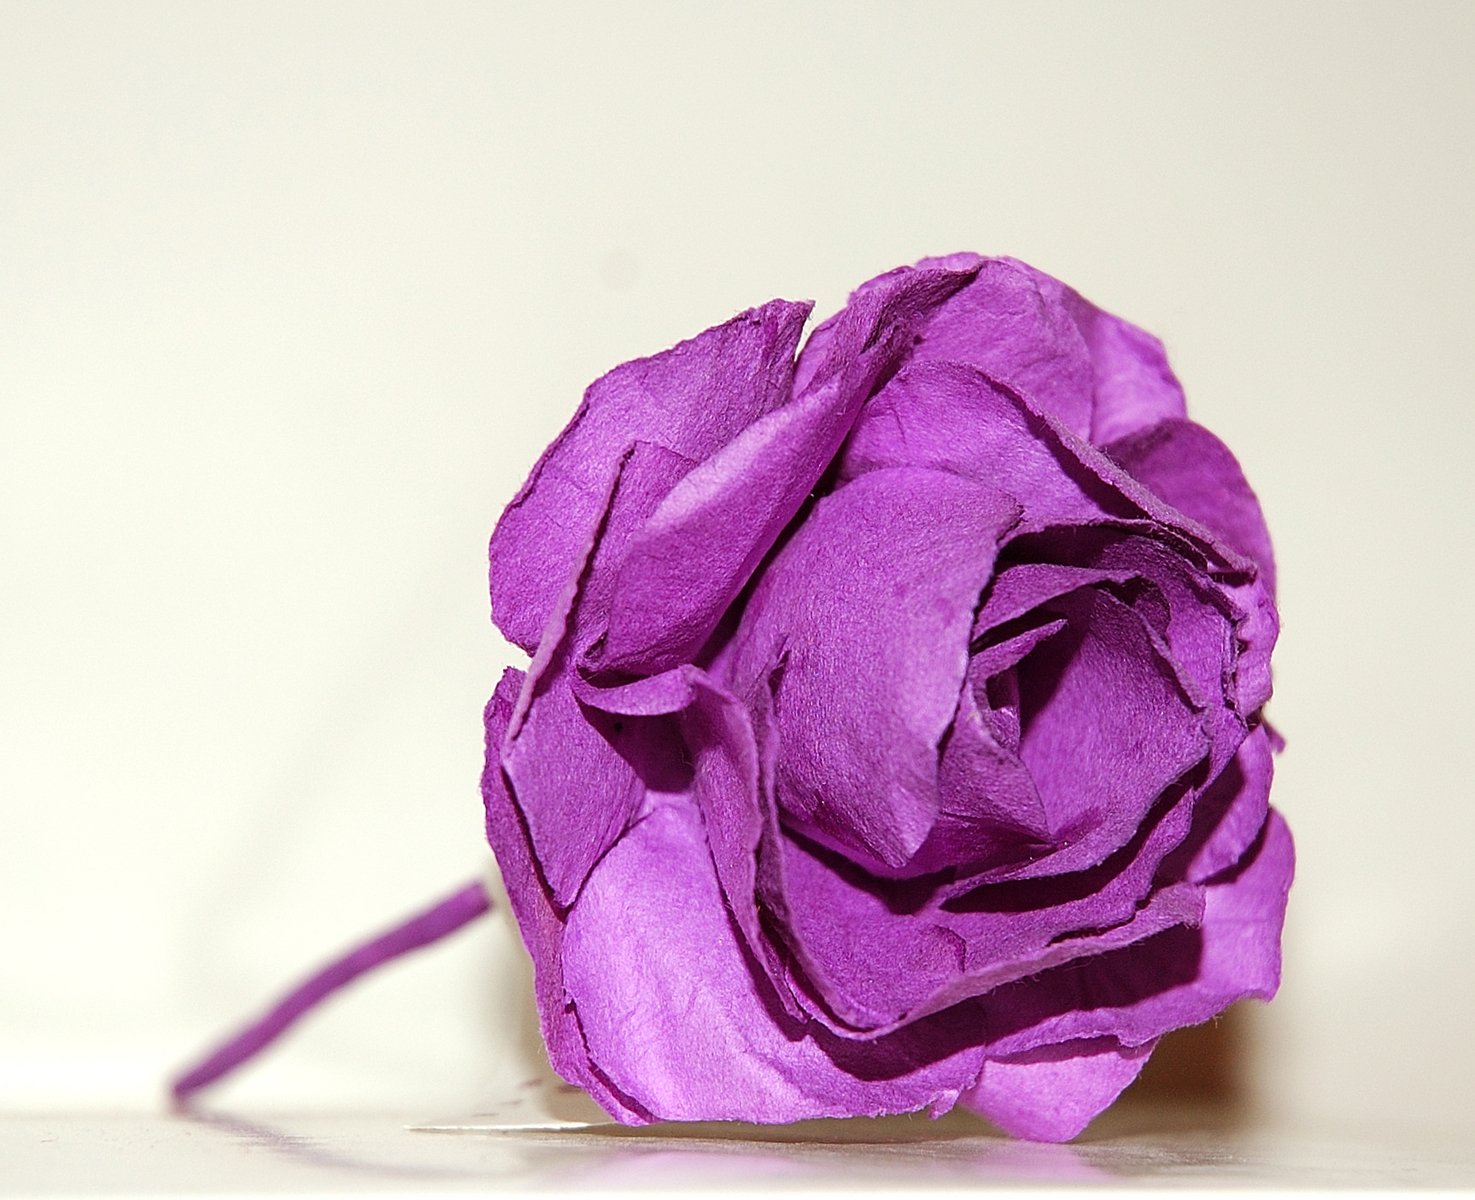 a large purple rose on a white background